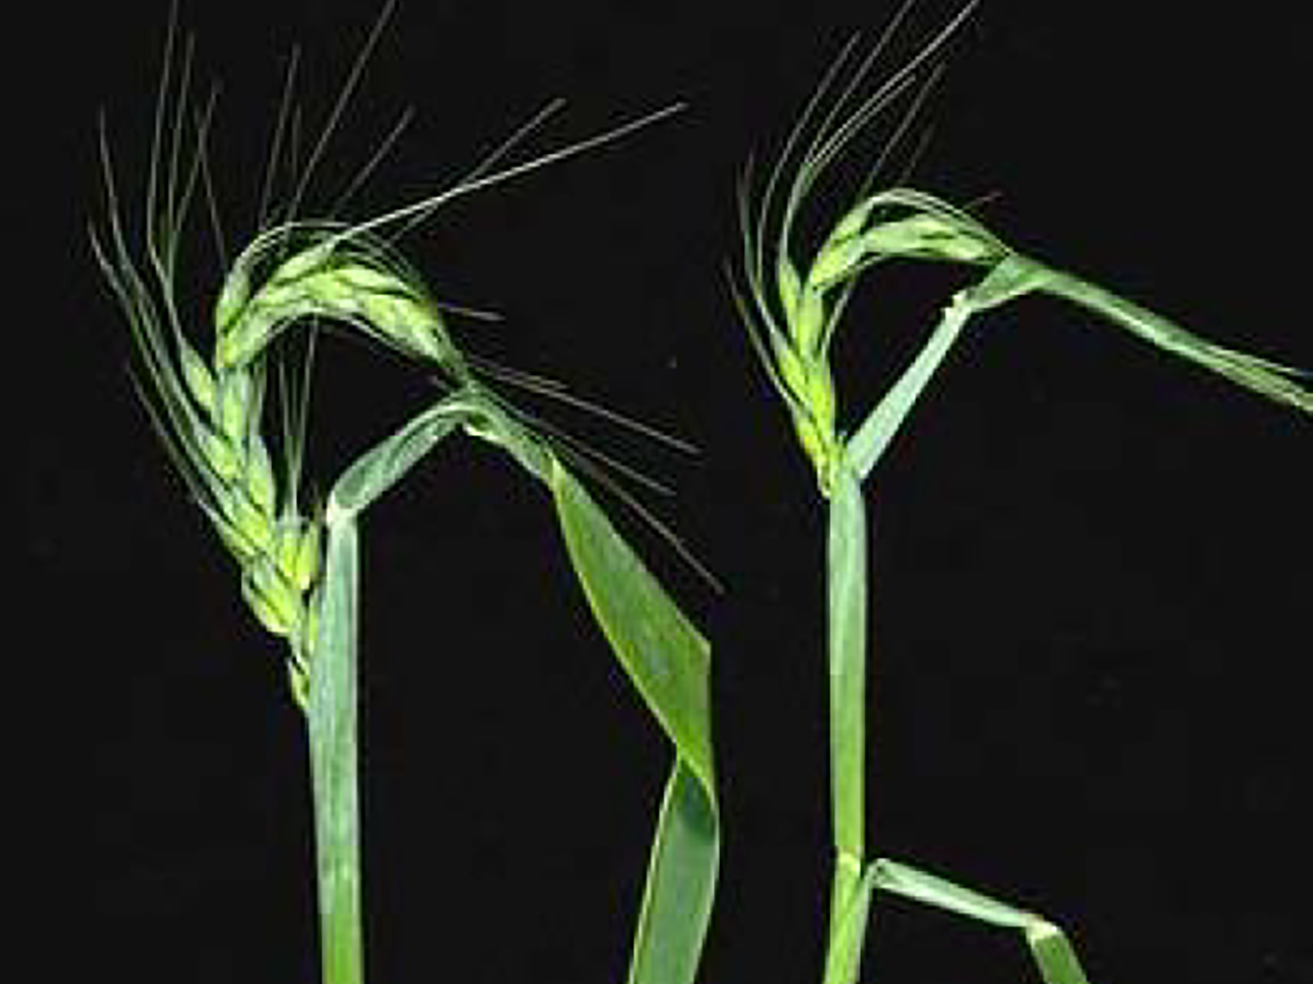 Fig. 8. Curled flag leaf from Russian wheat aphid feeding.